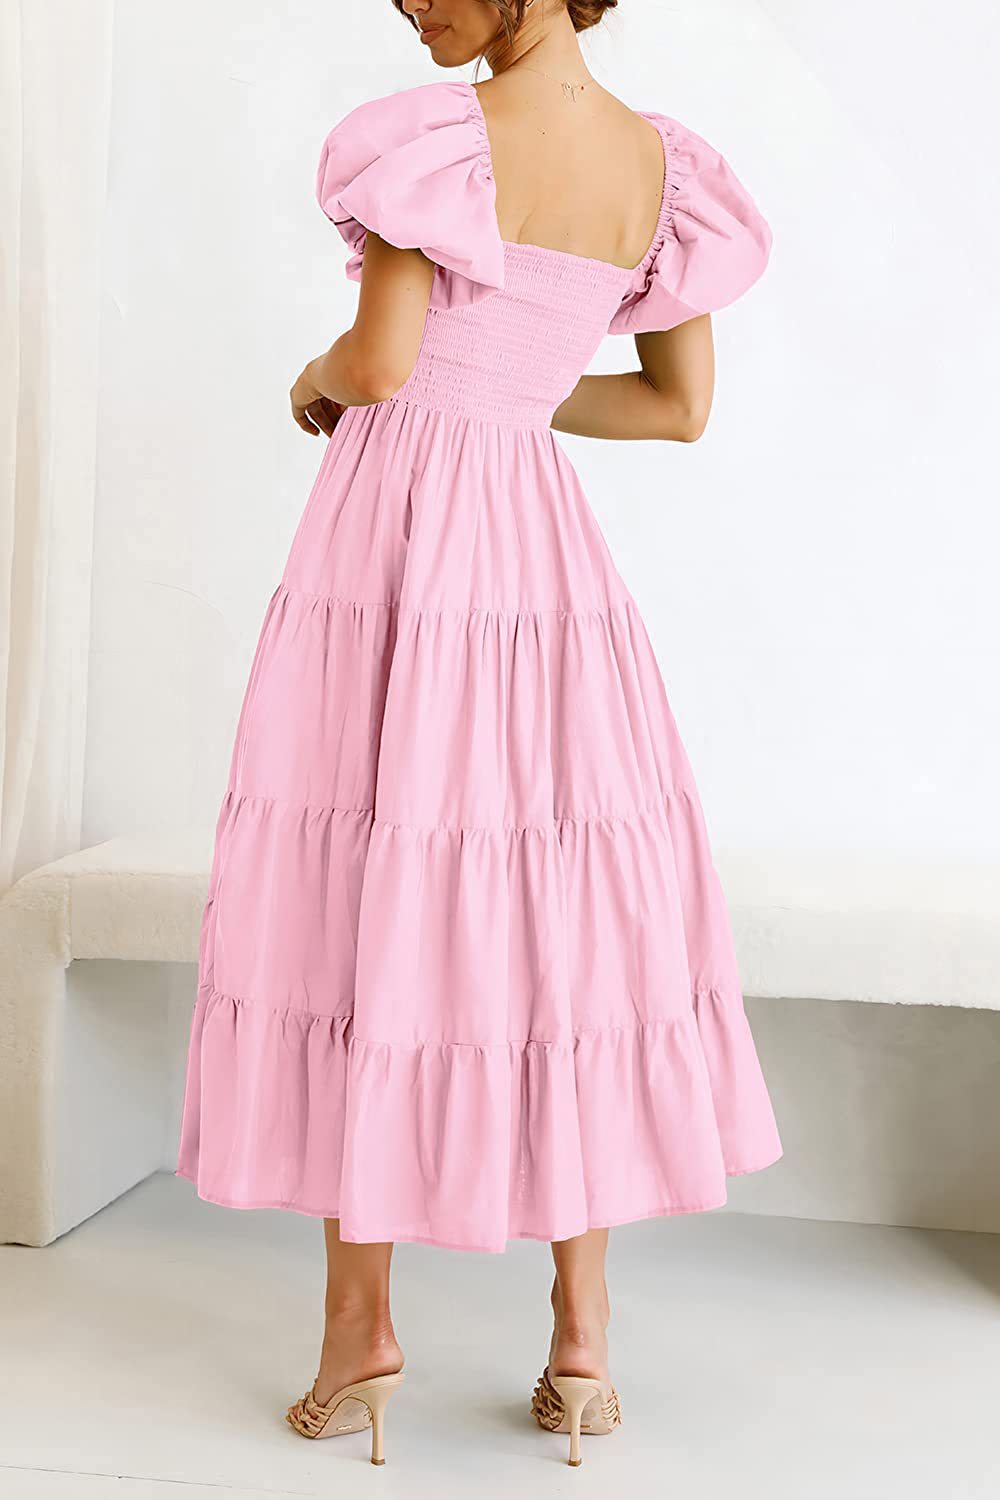 Square Collar Backless Puff Sleeve Pleated Short Sleeves Dress